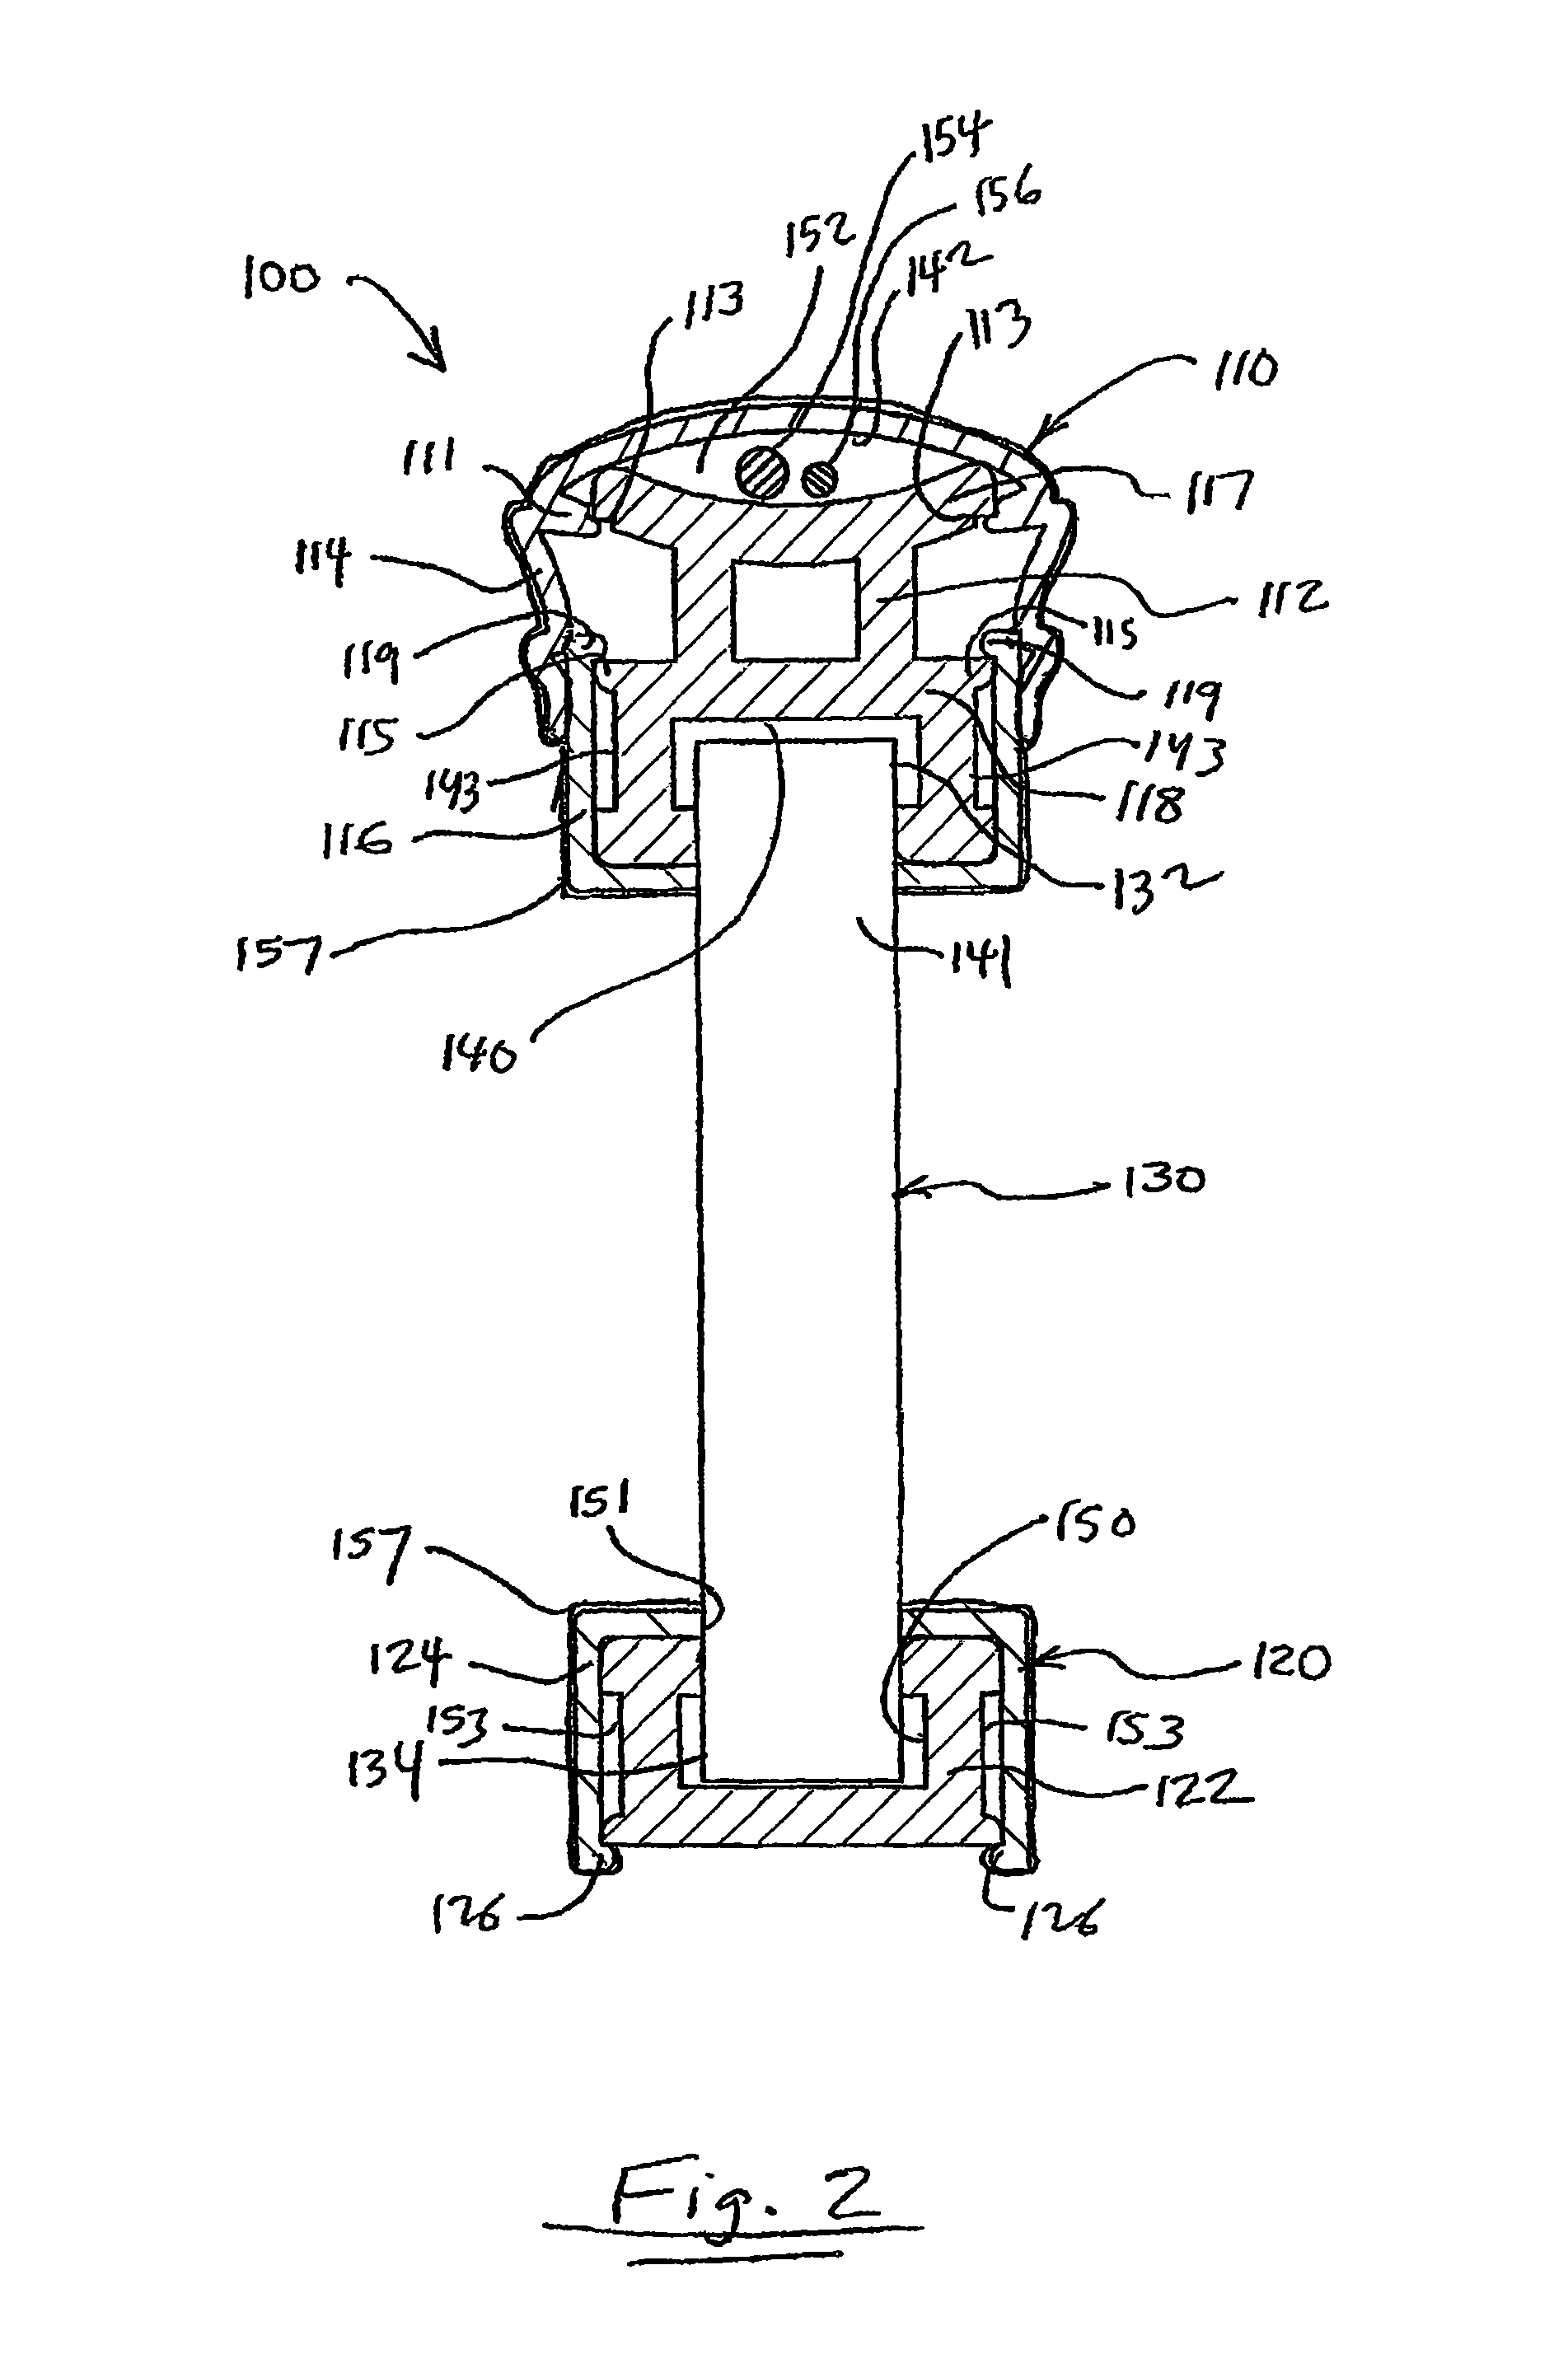 Railing assembly with detachable and upgradeable components